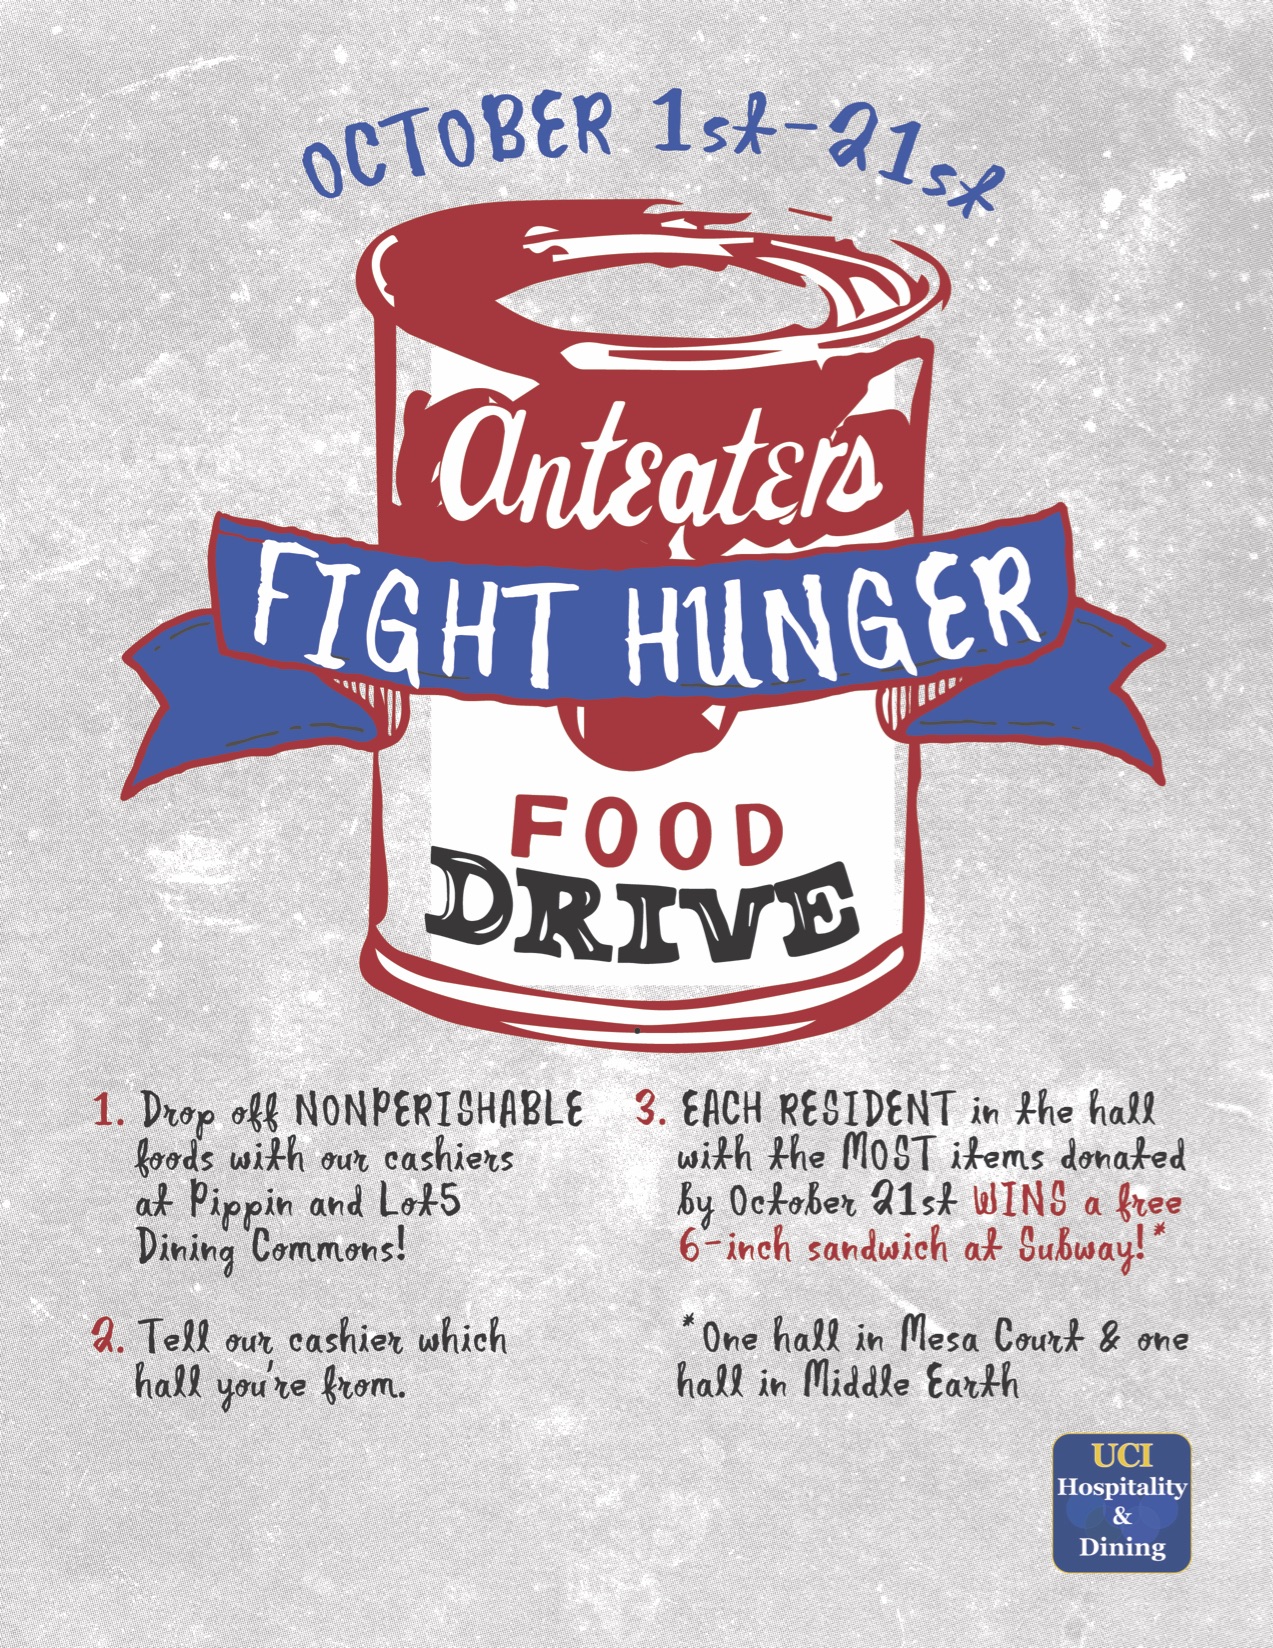 Anteaters Food Drive 2015 flyer